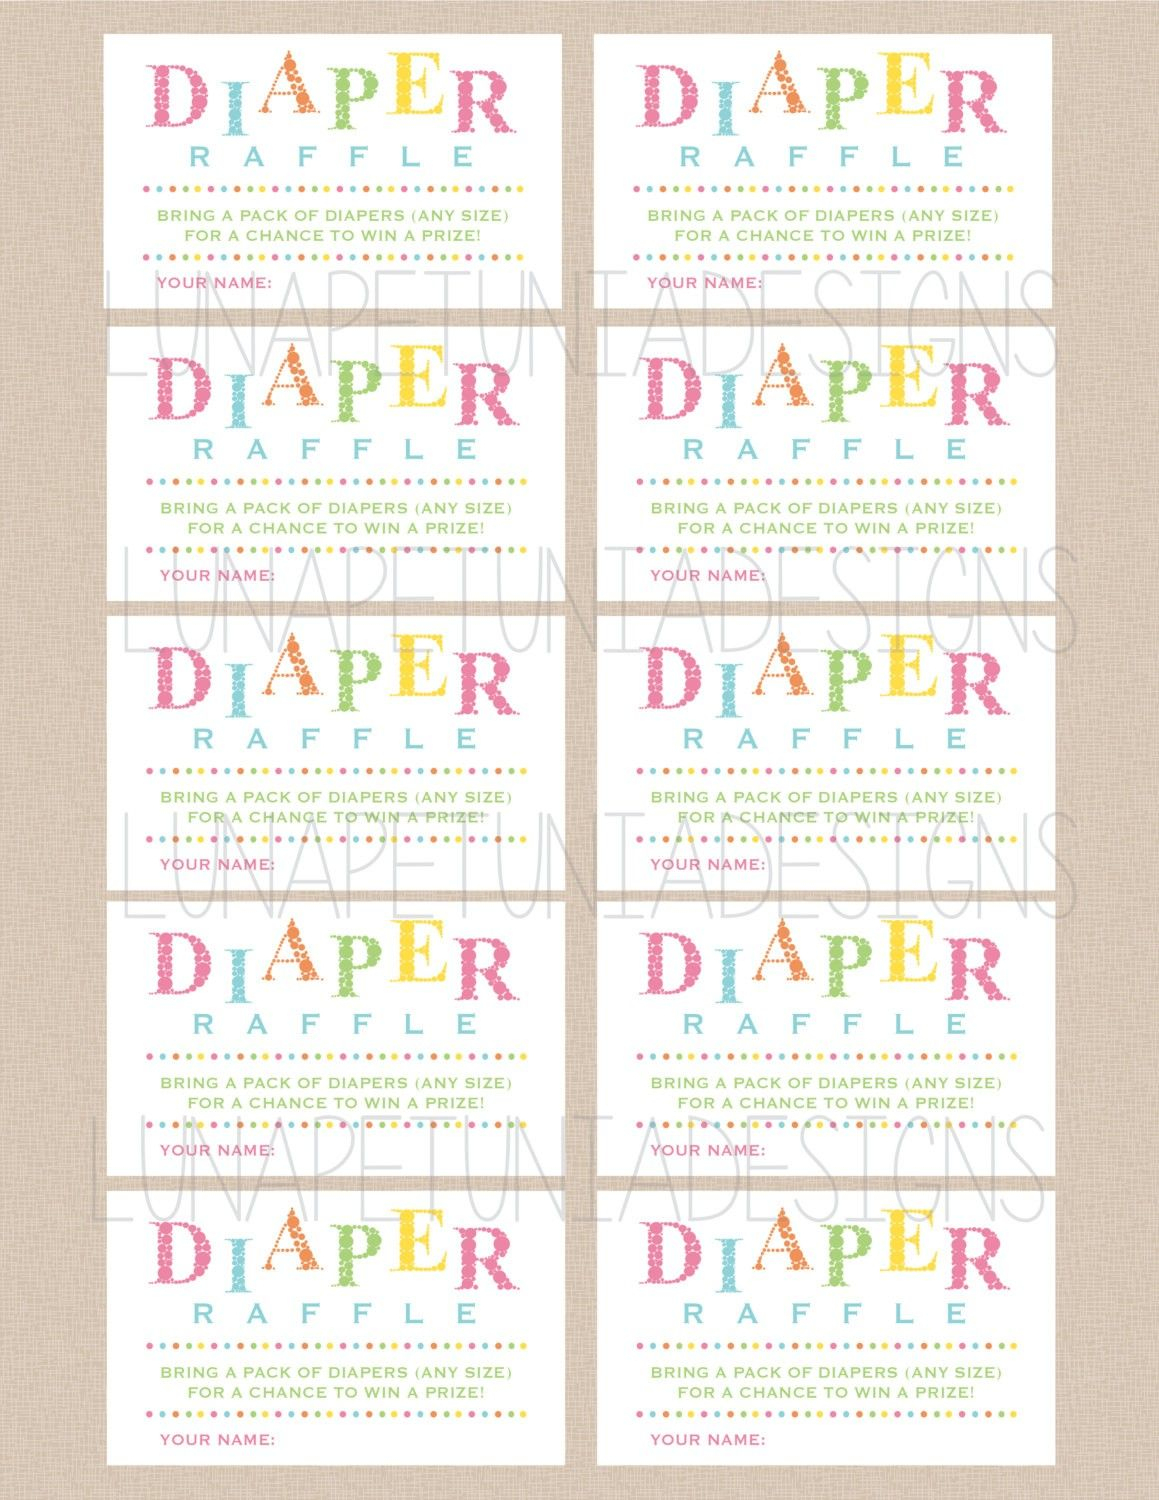 Charming Decoration Printable Diaper Raffle Tickets For Baby Boy - Free Printable Baby Shower Diaper Raffle Tickets